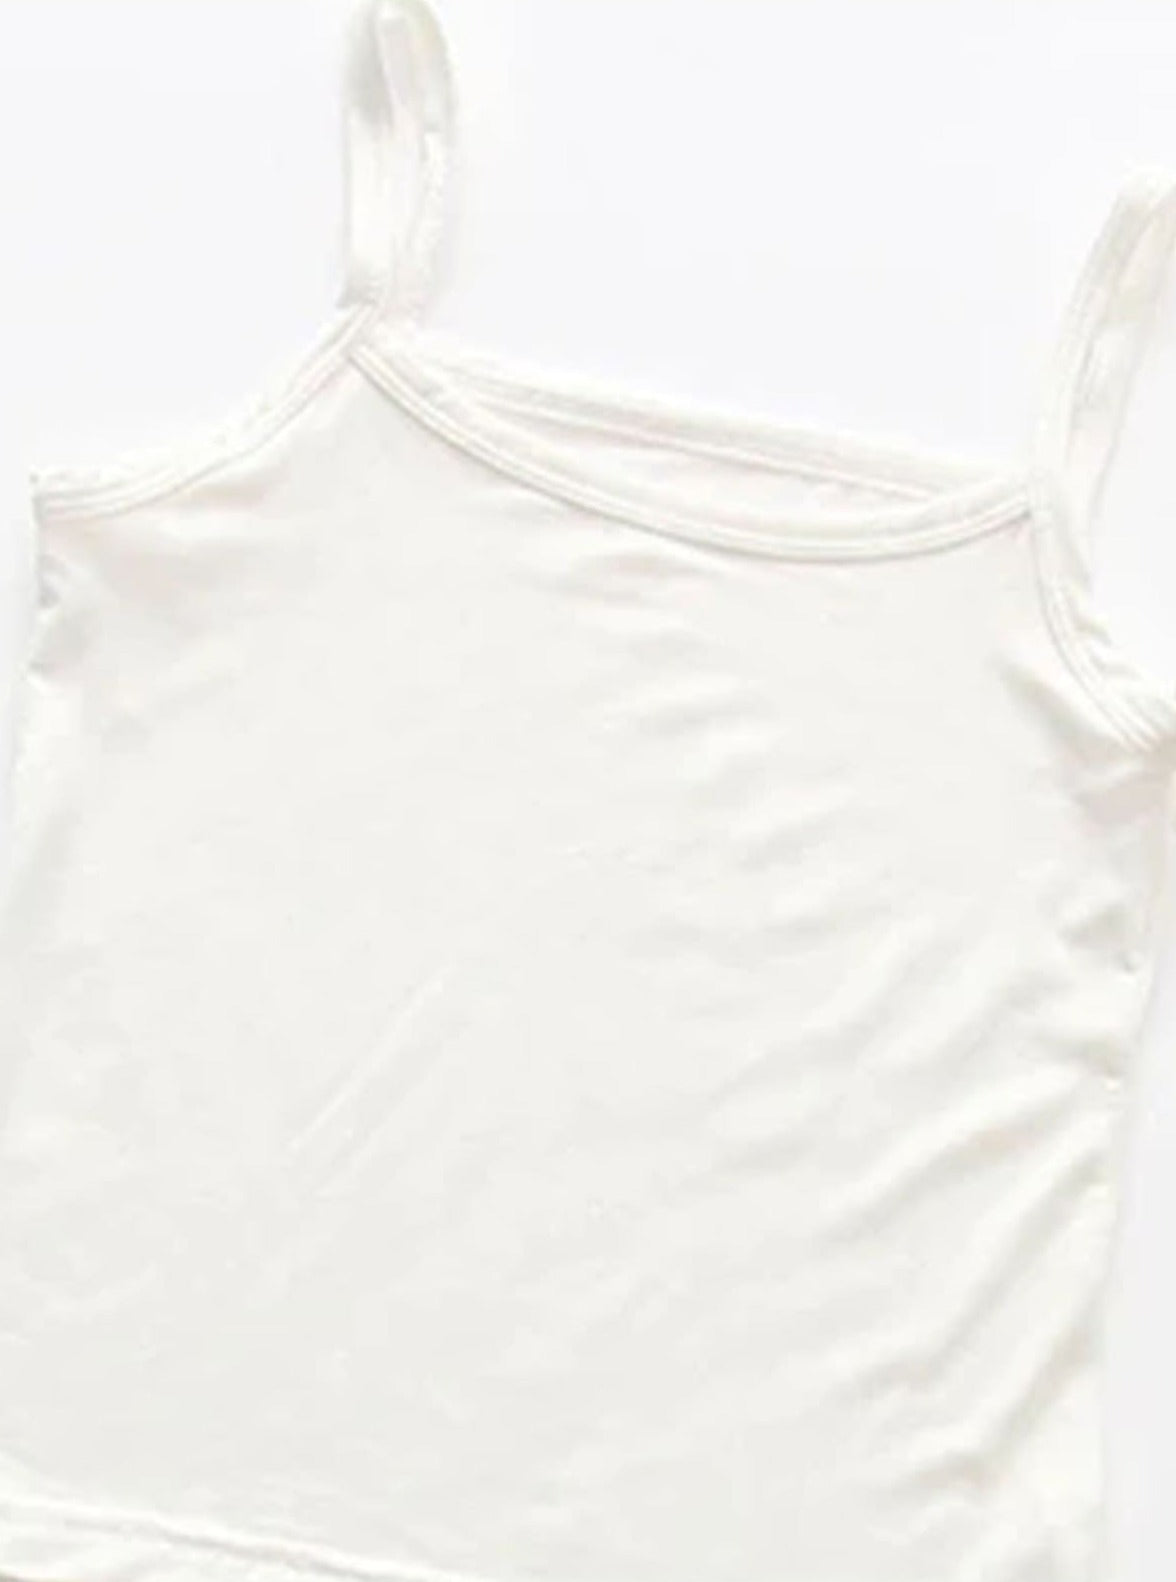 Girls Solid Camisole Tank Top - Girls Spring Casual Top